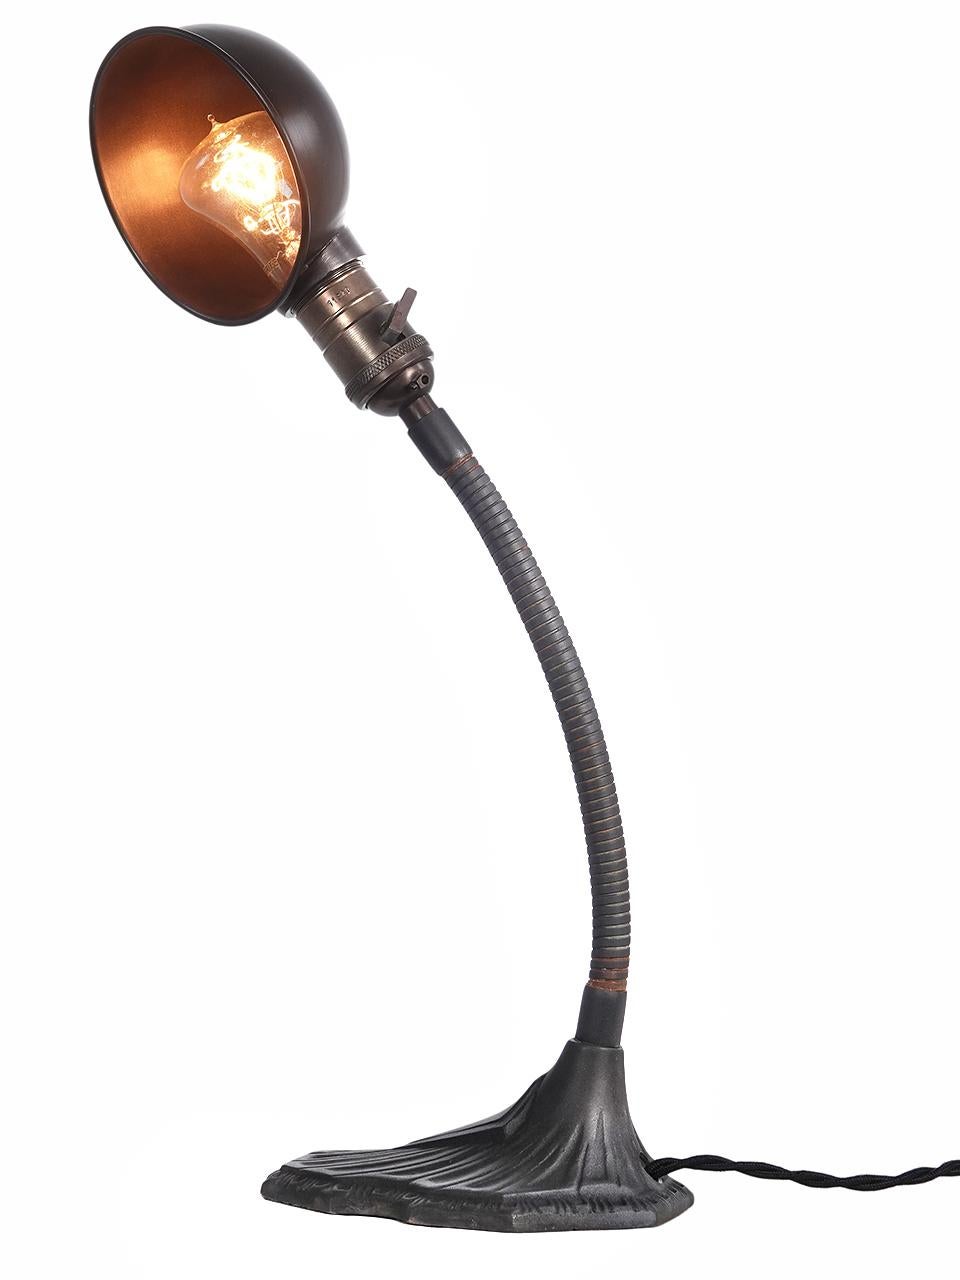 This is a nice size desk lamp. Not too big so it takes over the desk. The line are clean and simple with a gooseneck arm, deco style molded cast iron base and a brass shade. We rewired the lamp with an antique style black fabric covered twisted